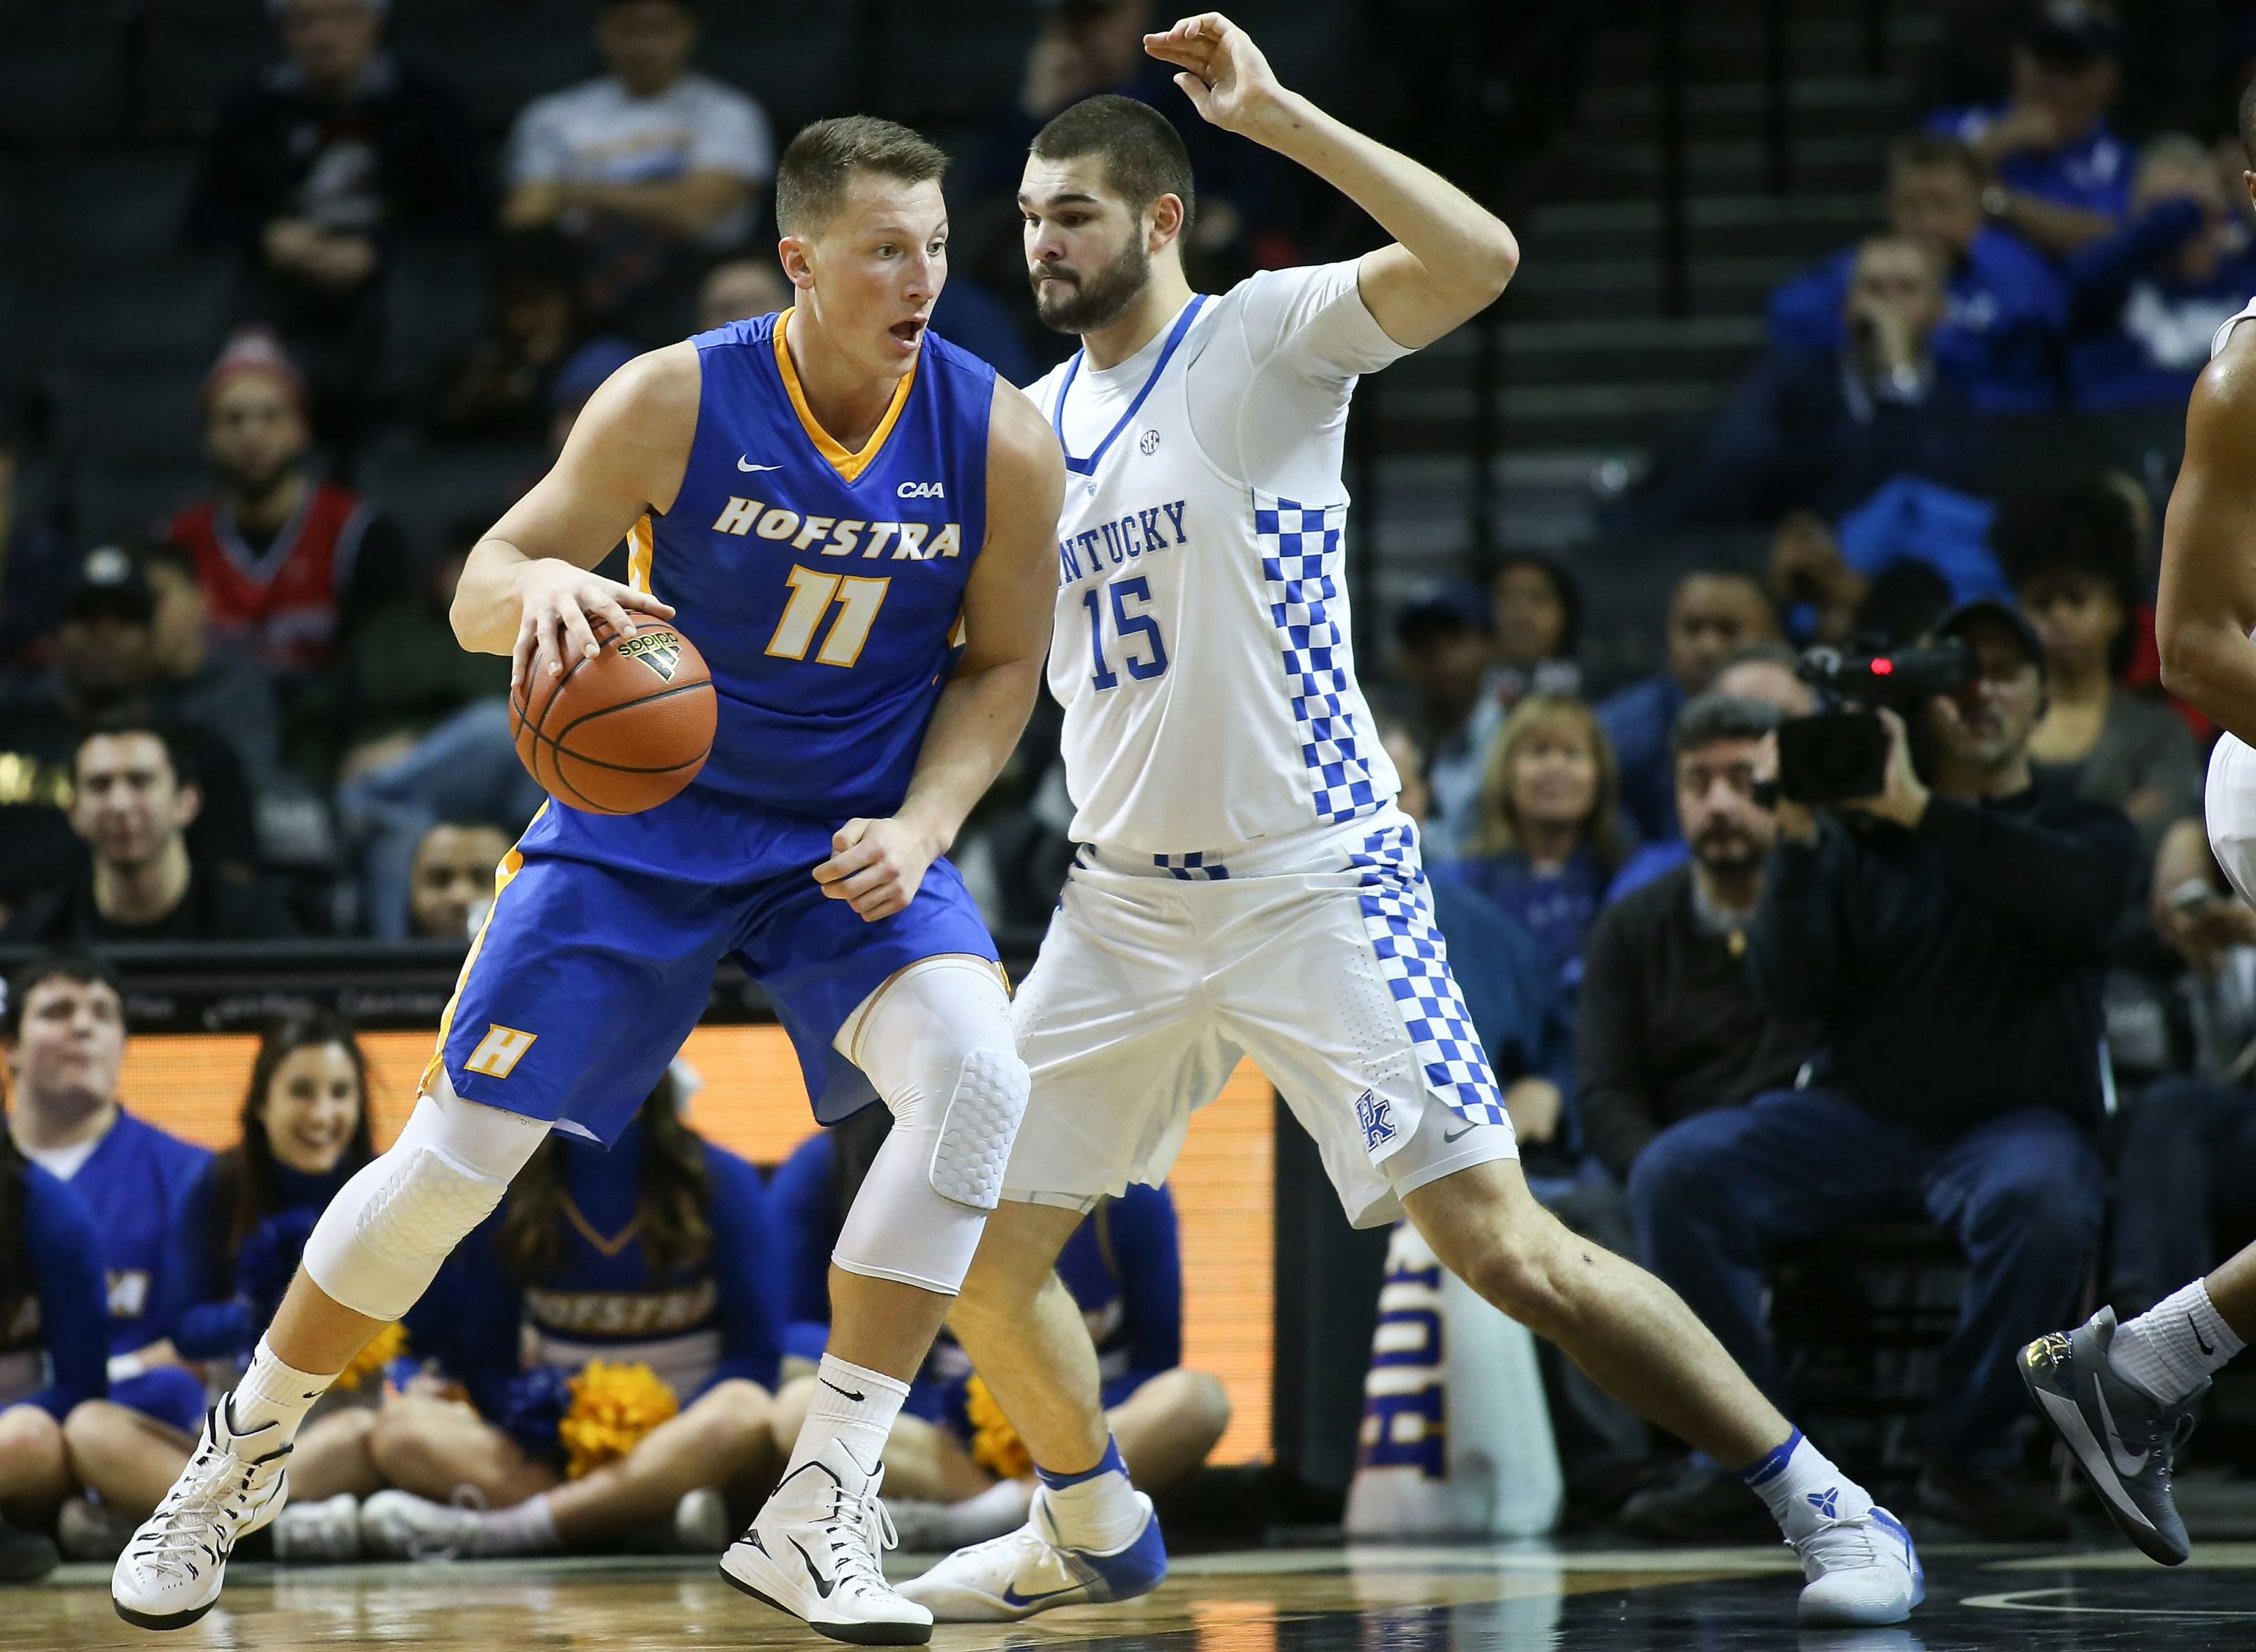 Hofstra Basketball: 2018-19 season preview for the Pride